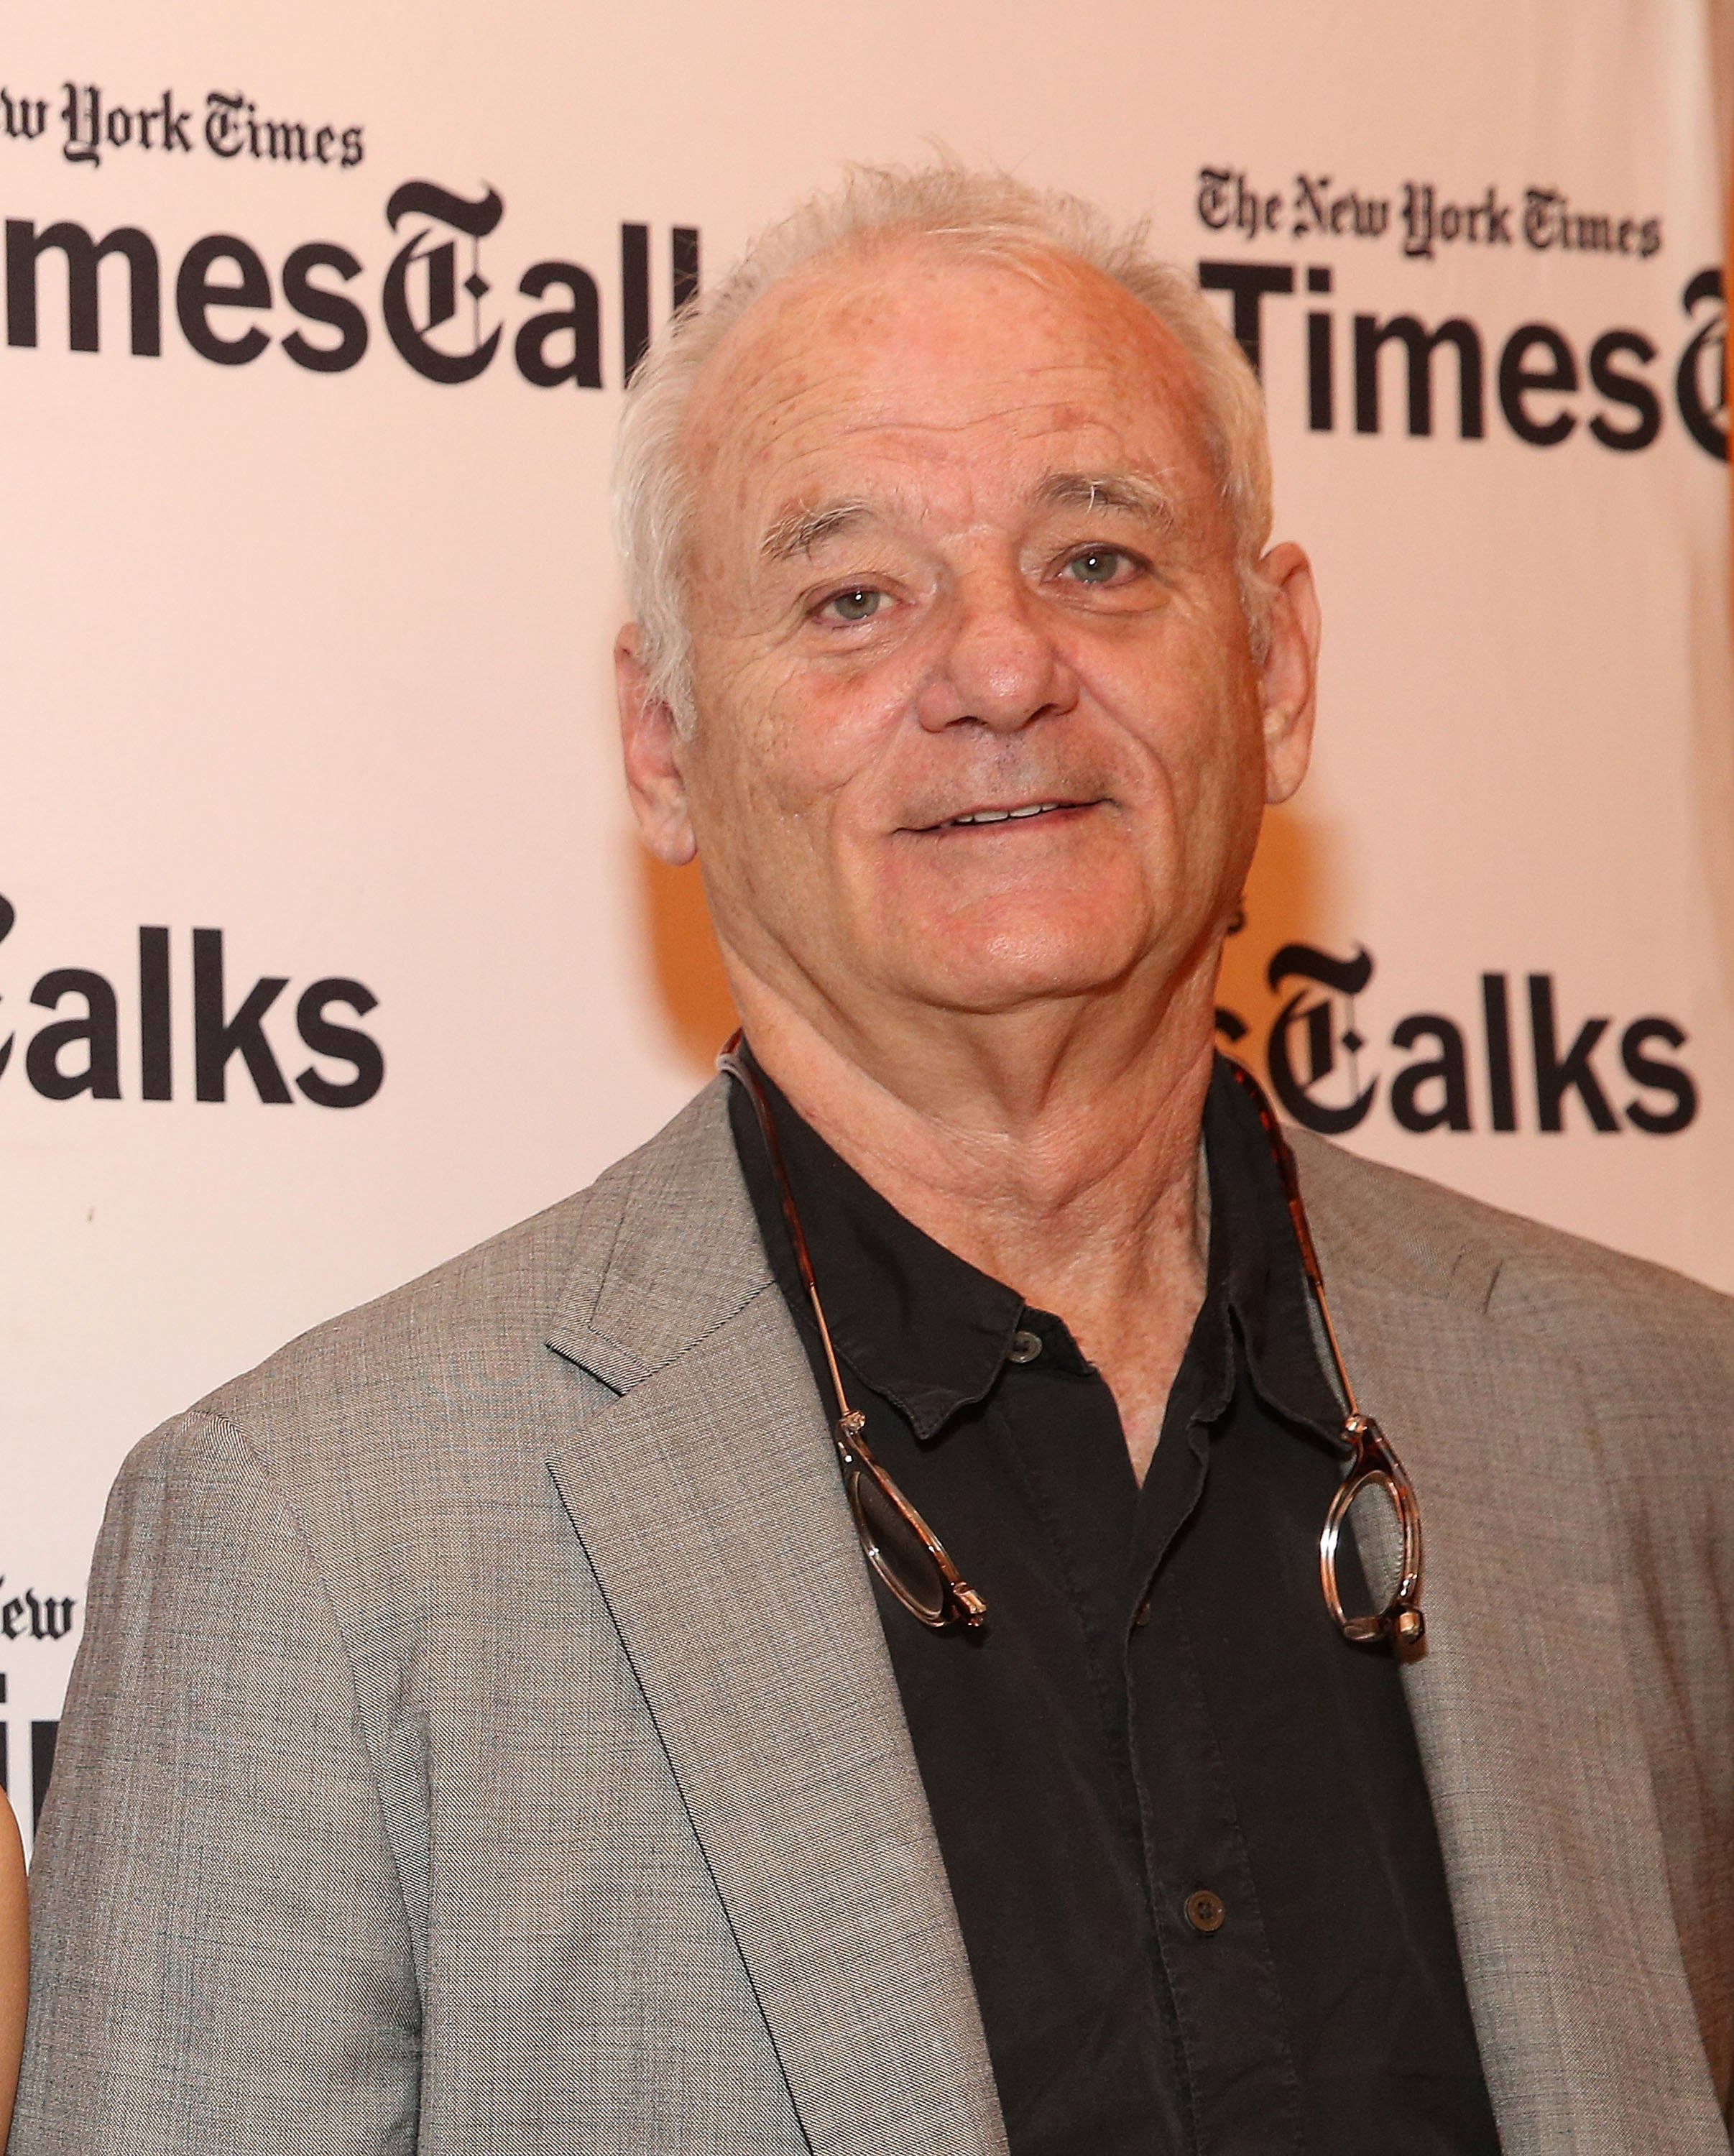 Bill Murray attends TimesTalks Presents event in New York City on June 29, 2017 | Photo: Getty Images